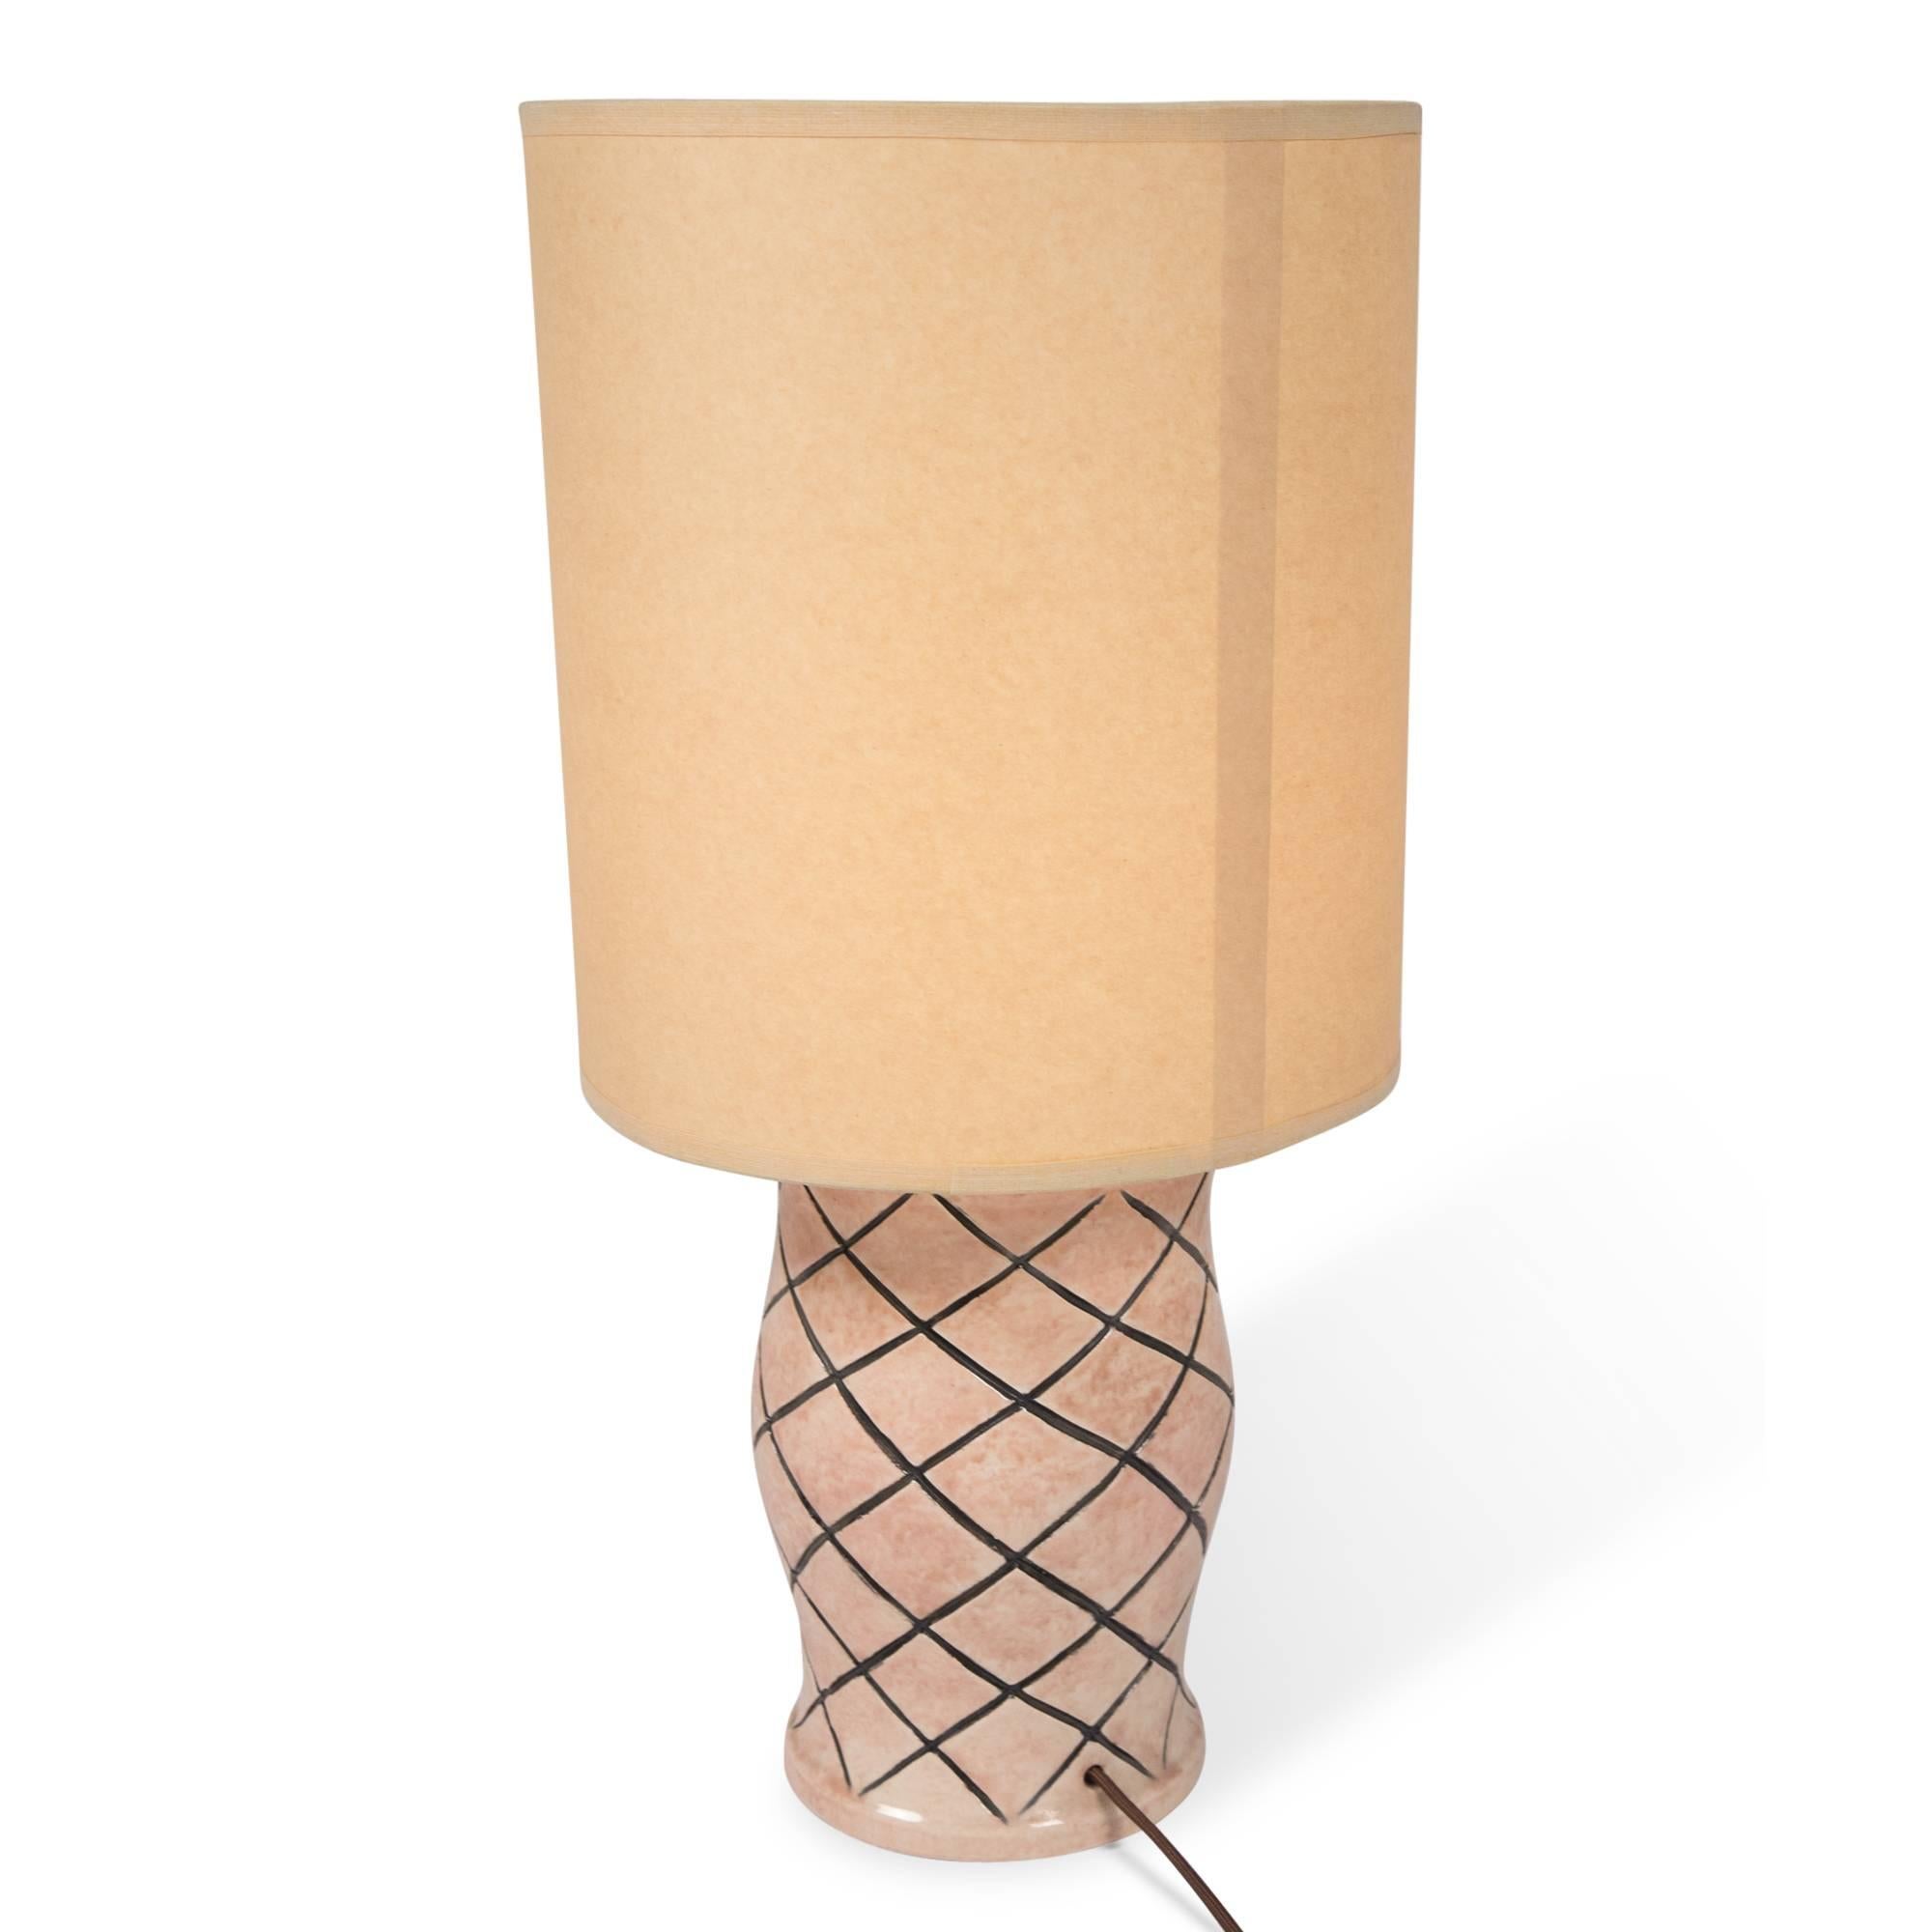 Crosshatch Glazed Ceramic Table Lamp, French, 1930s In Excellent Condition For Sale In Brooklyn, NY